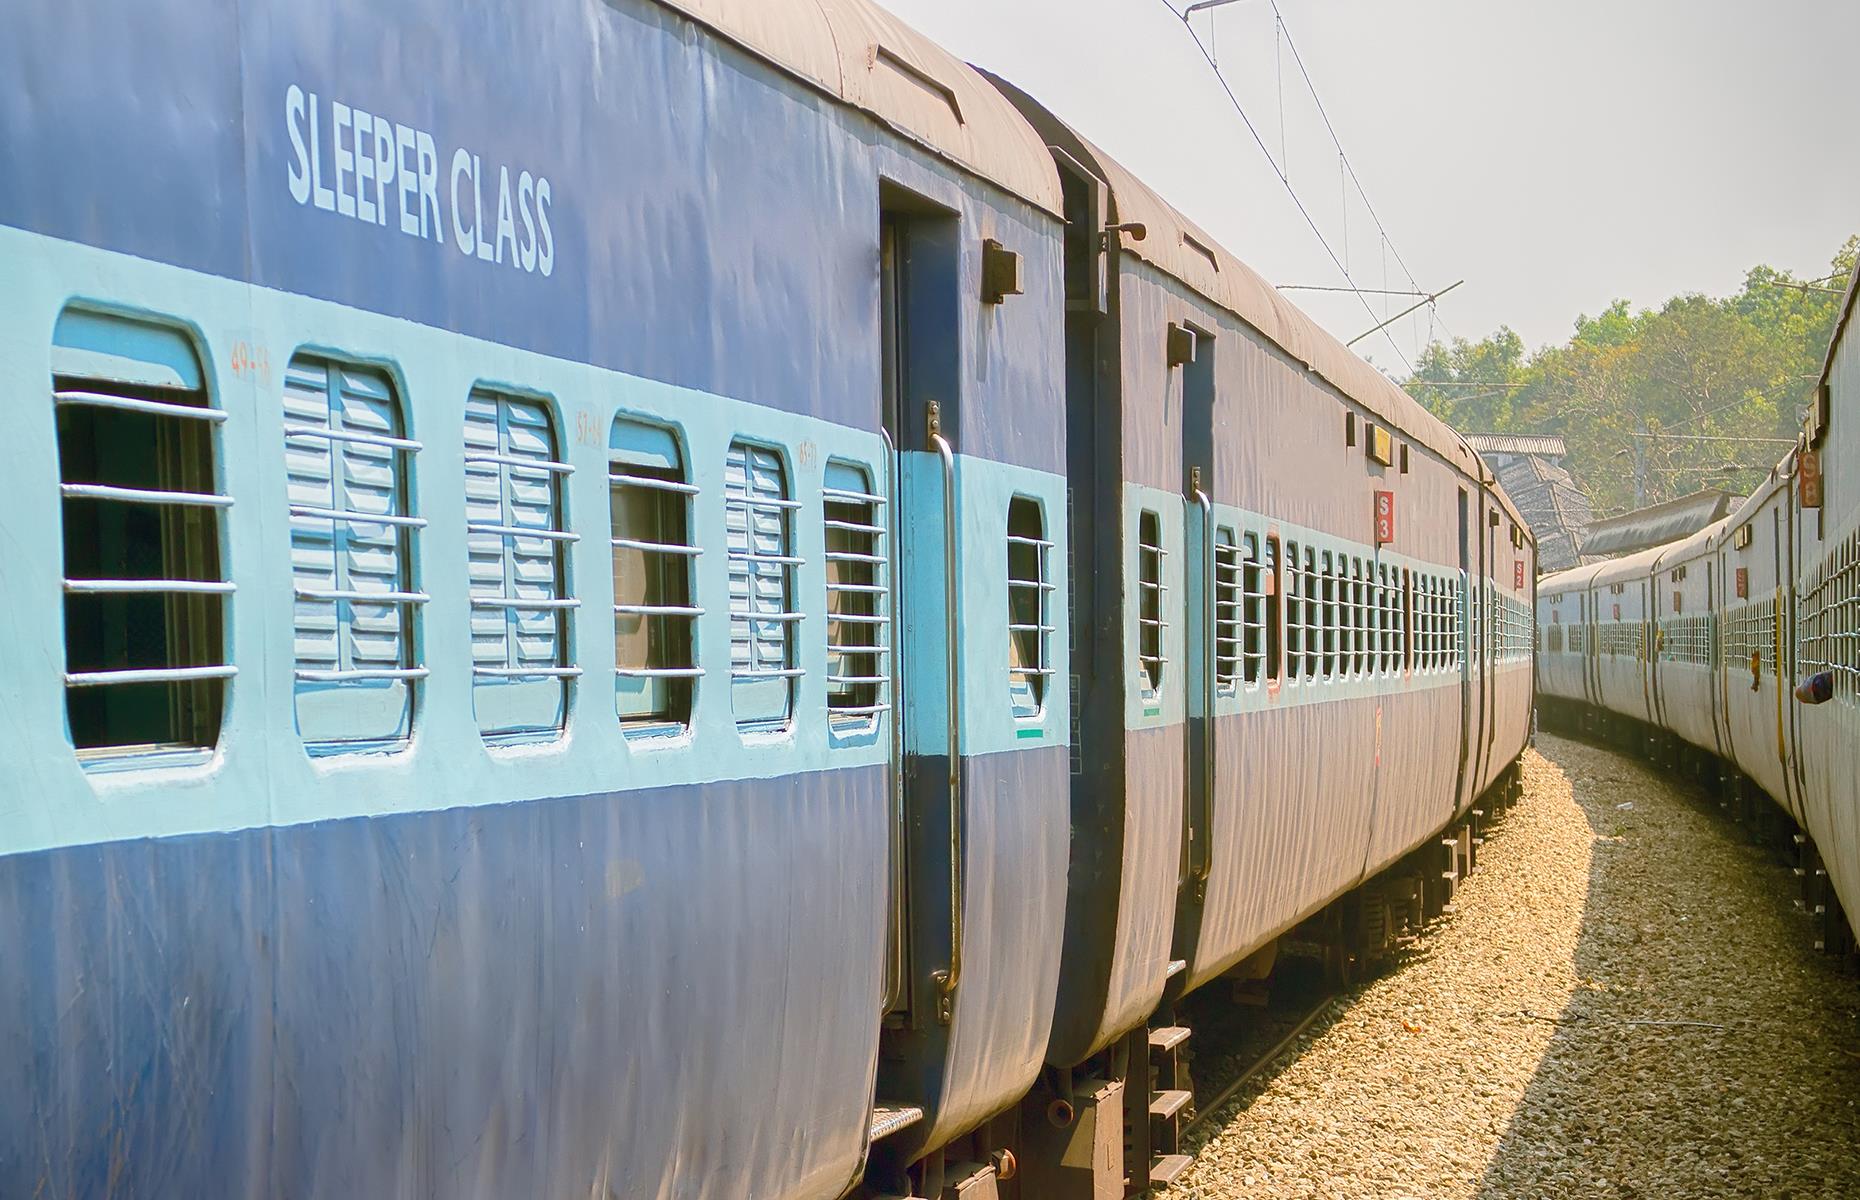 Some of India’s greatest sights are an easy night-time journey from Delhi by train. Leave India’s capital just after 9pm and arrive in the holy city of Varanasi for breakfast 11 hours later.